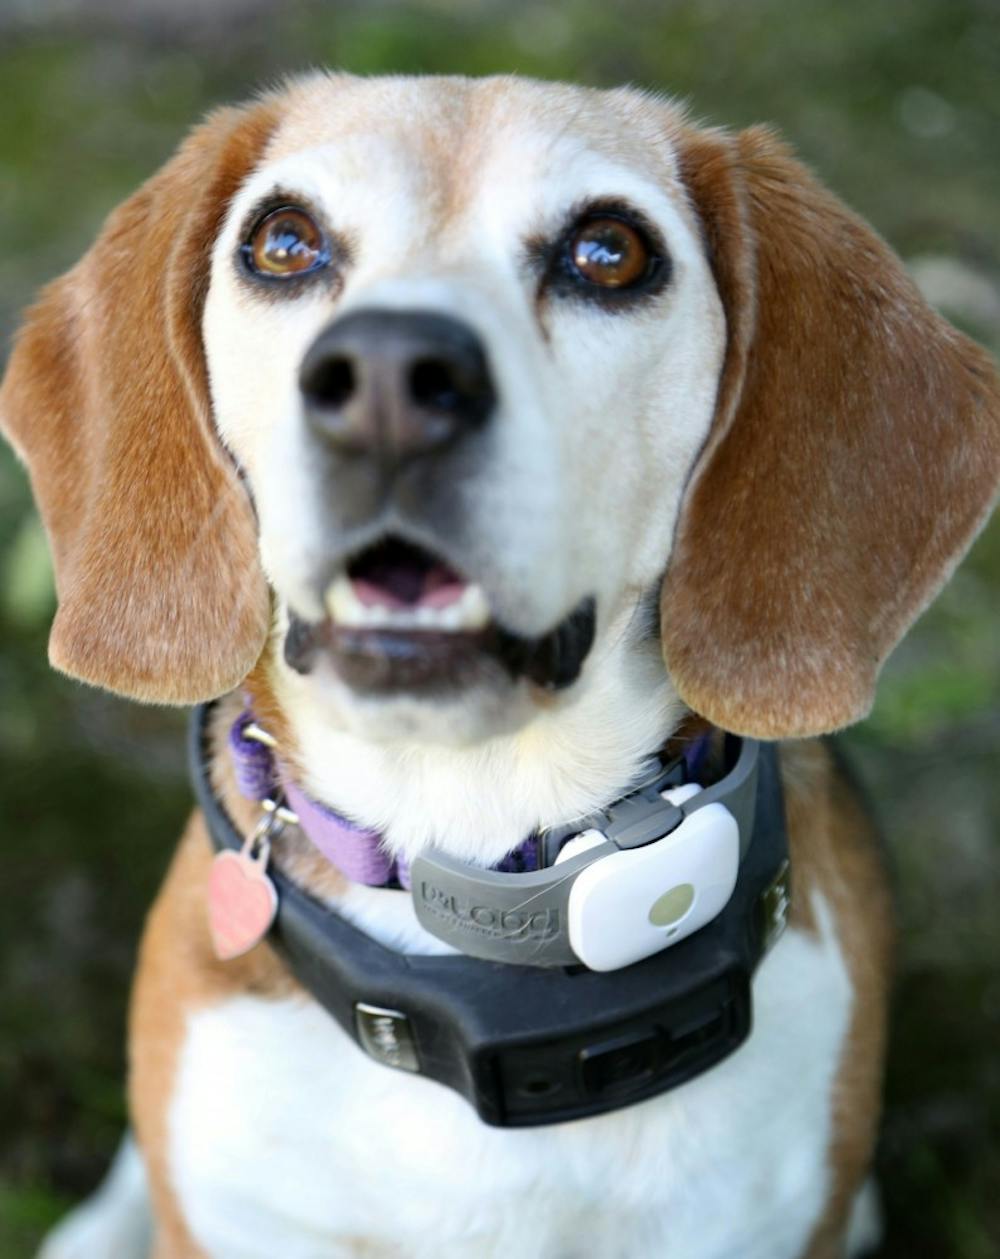 Lucy, a beagle owned by Pat May of Pleasanton, Calif., wears two tech devices -- Tagg, a pet tracker, and Voyce, for monitoring pet activity levels -- on Tuesday, Feb. 24, 2015. (Jim Stevens/Bay Area News Group/TNS)